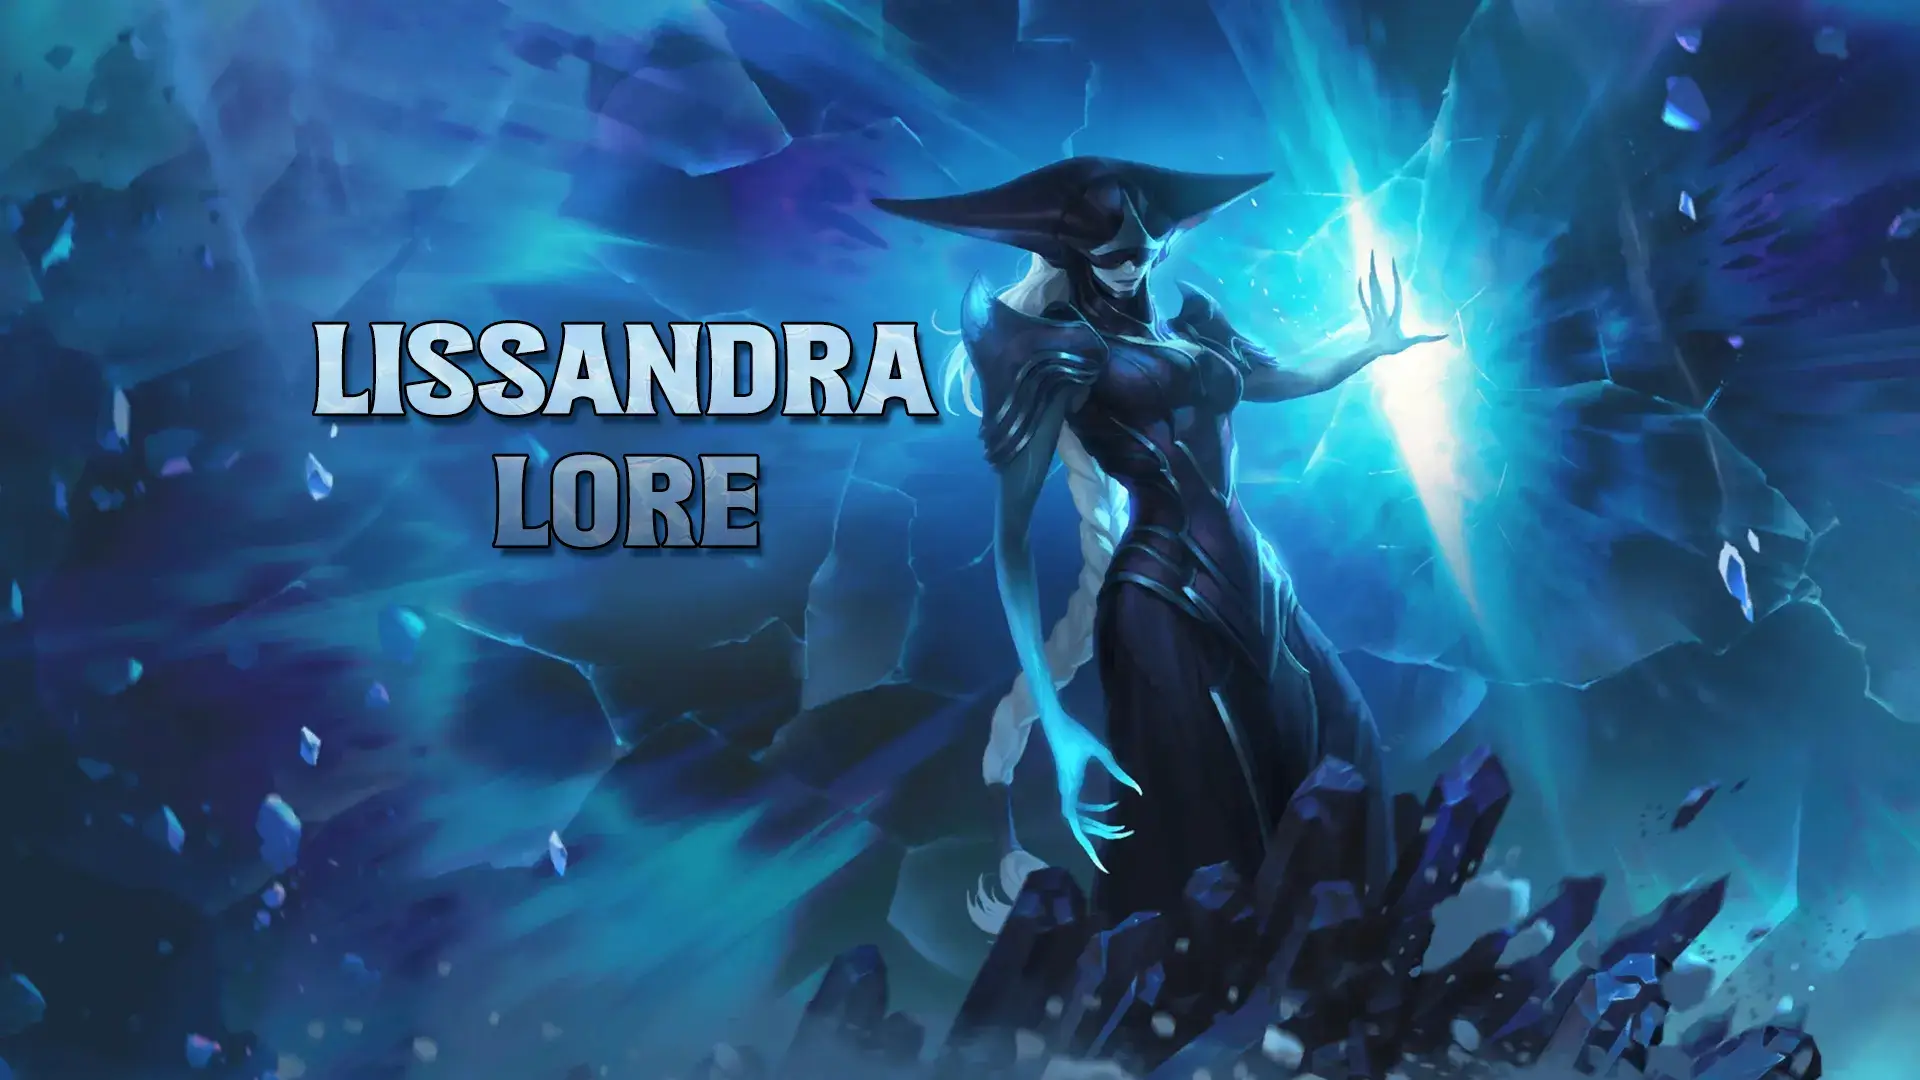 Lissandra touching the True Ice holding back the Frozen Watchers in the Frostguard Citadel